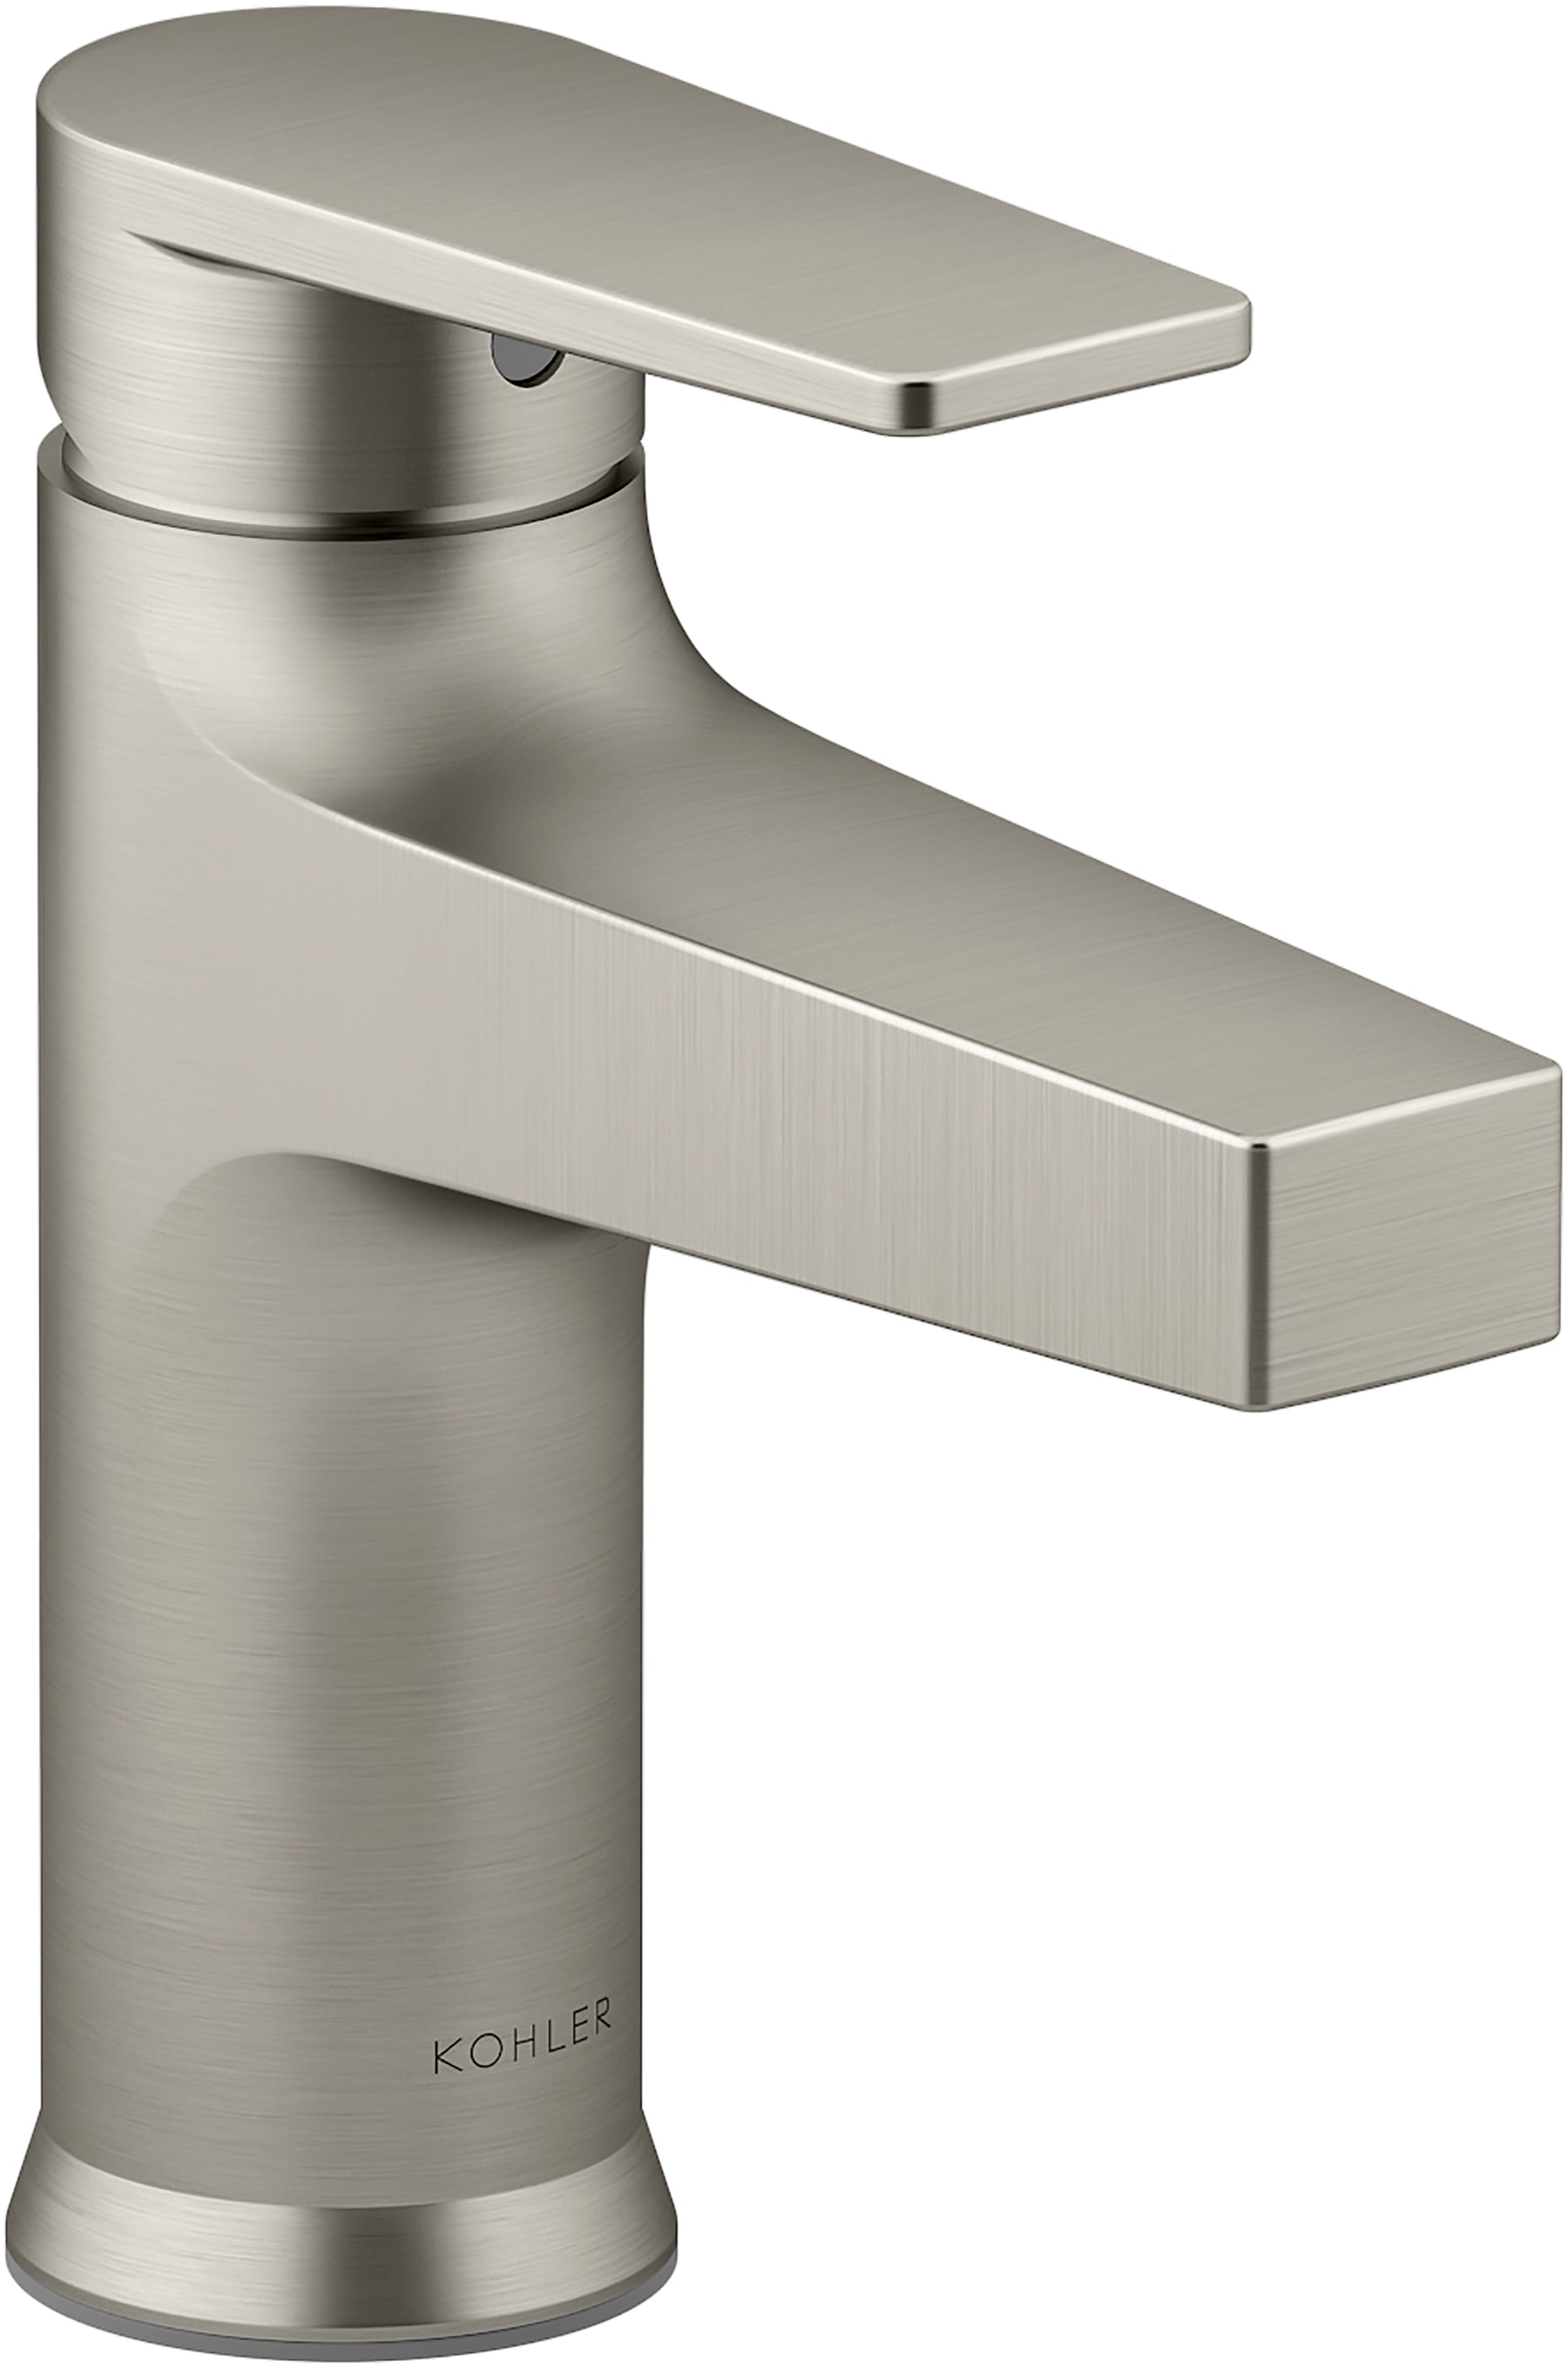 Kohler K 74013 4 Bn Brushed Nickel Taut 1 2 Gpm Single Hole Bathroom Faucet With Pop Up Drain Assembly Faucetdirect Com